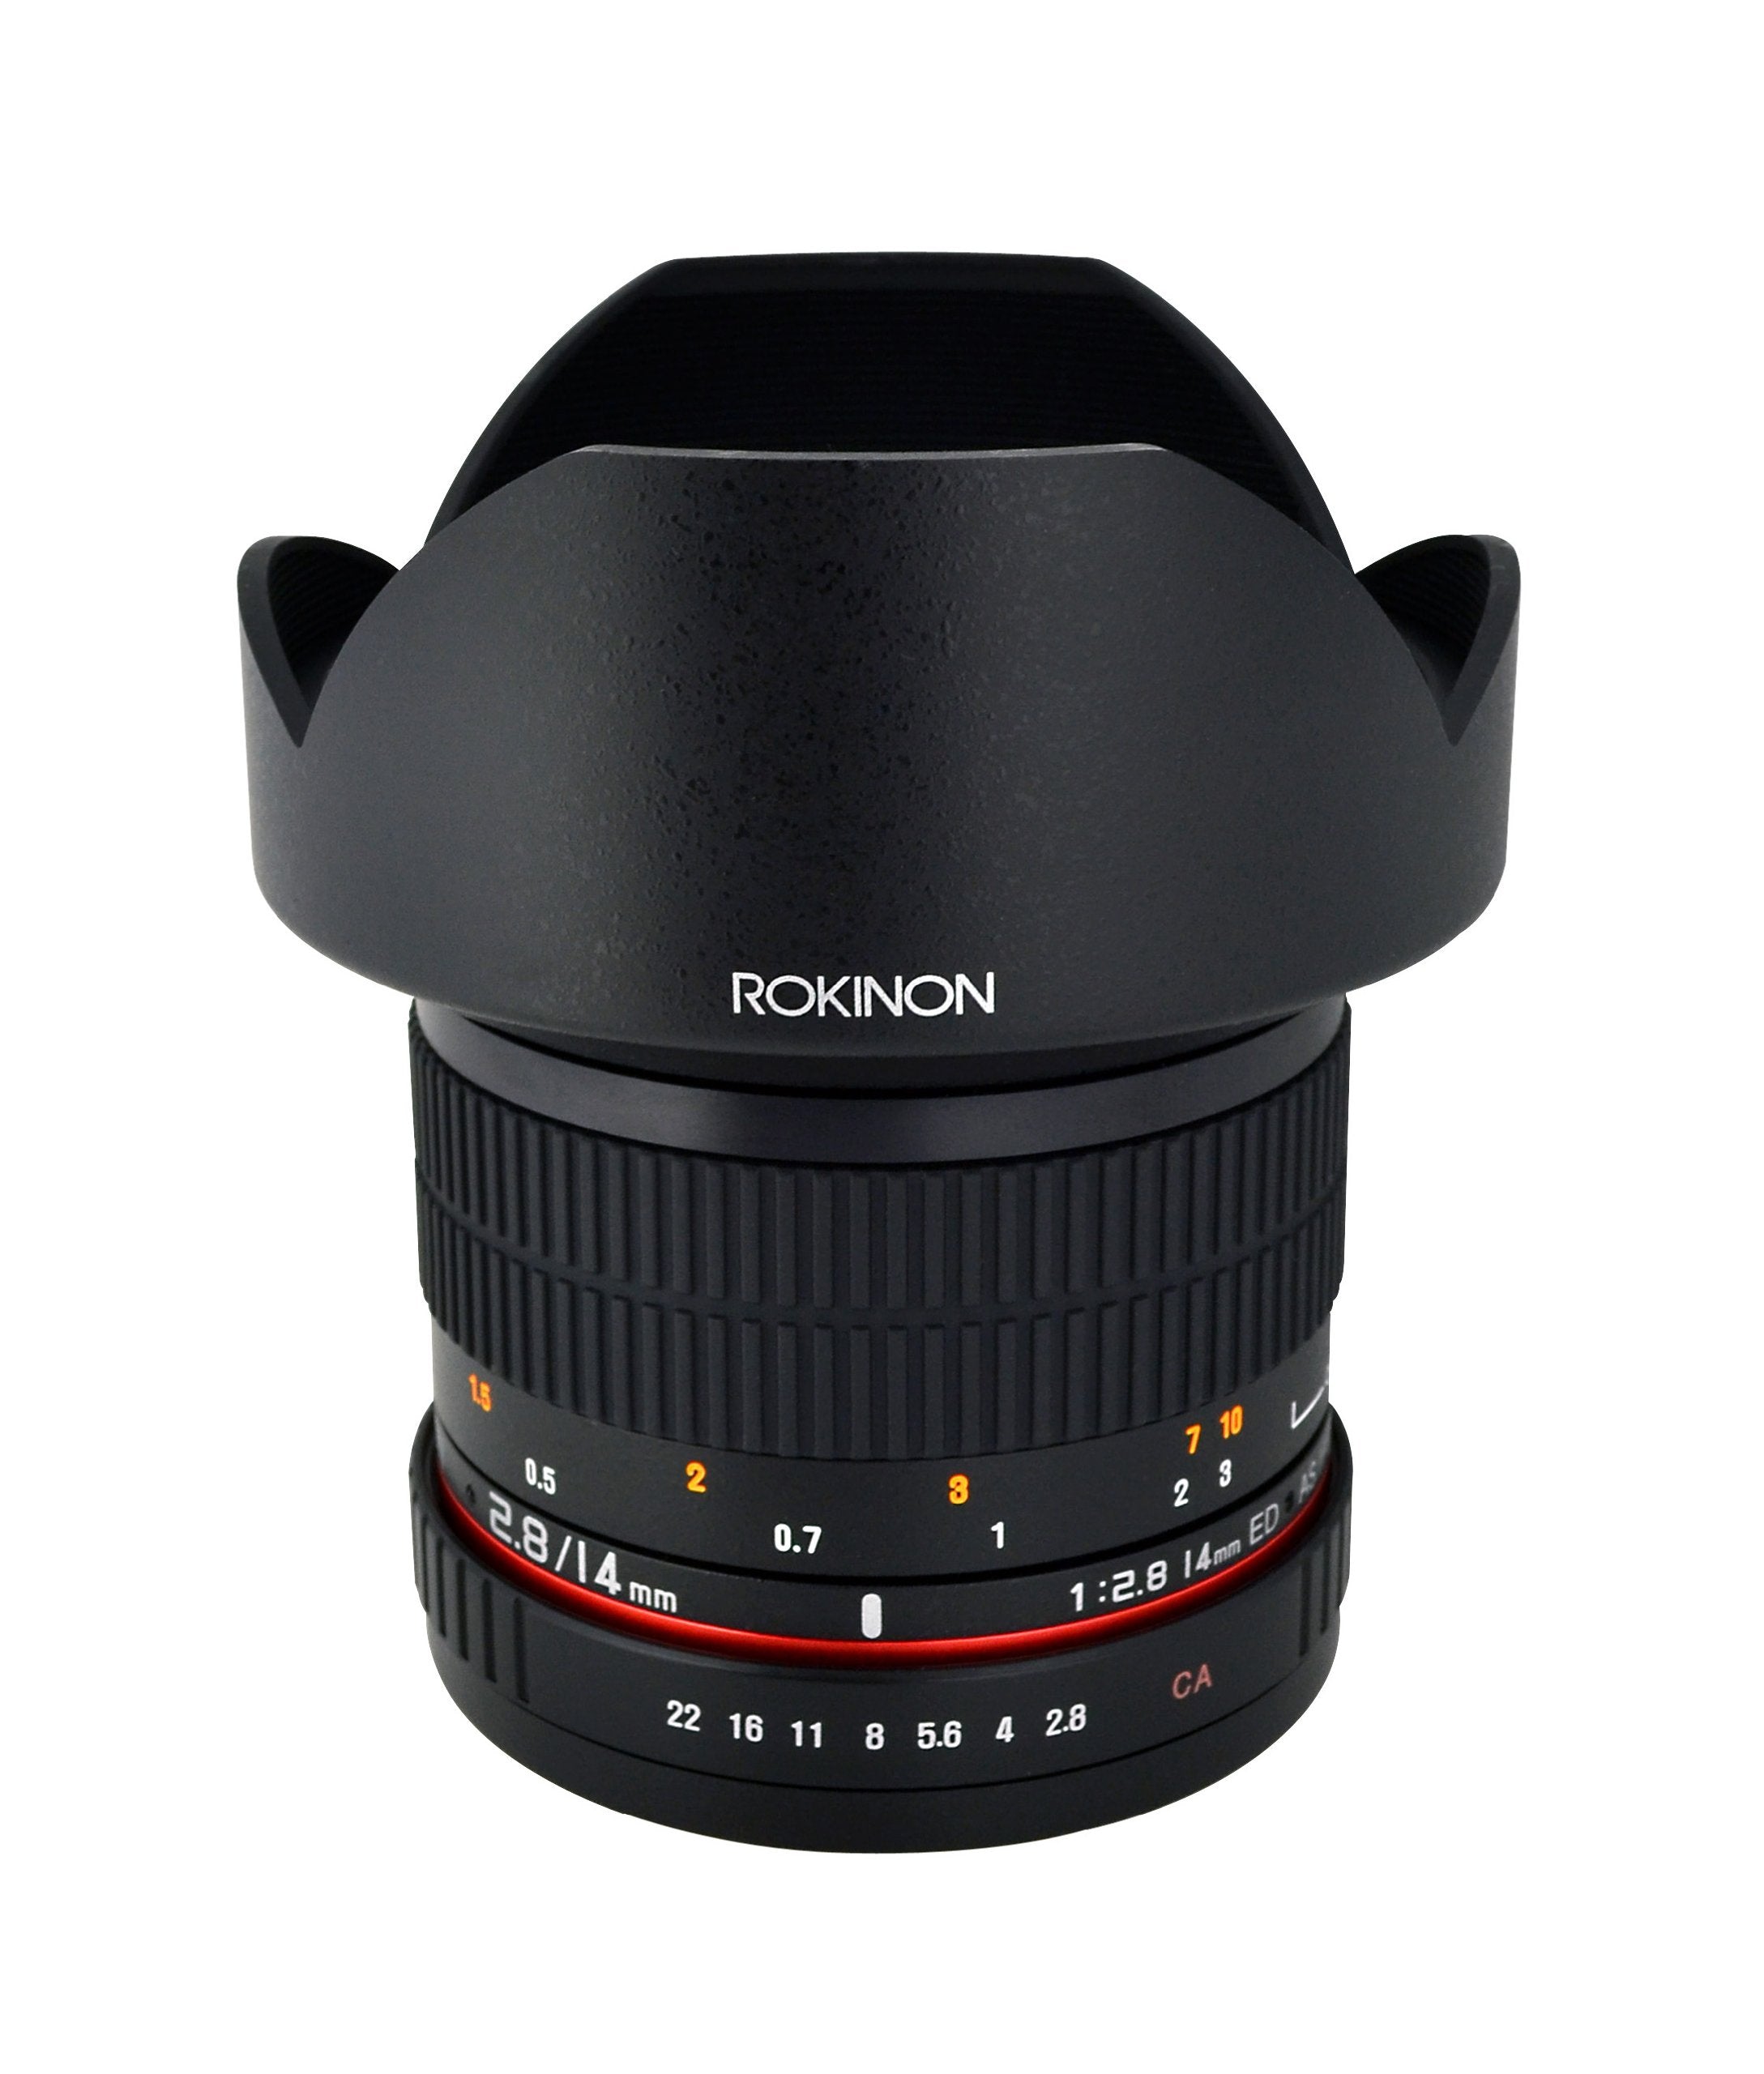 Rokinon 14mm F/2.8 Ultra Wide Angle Lens for Olympus 4/3